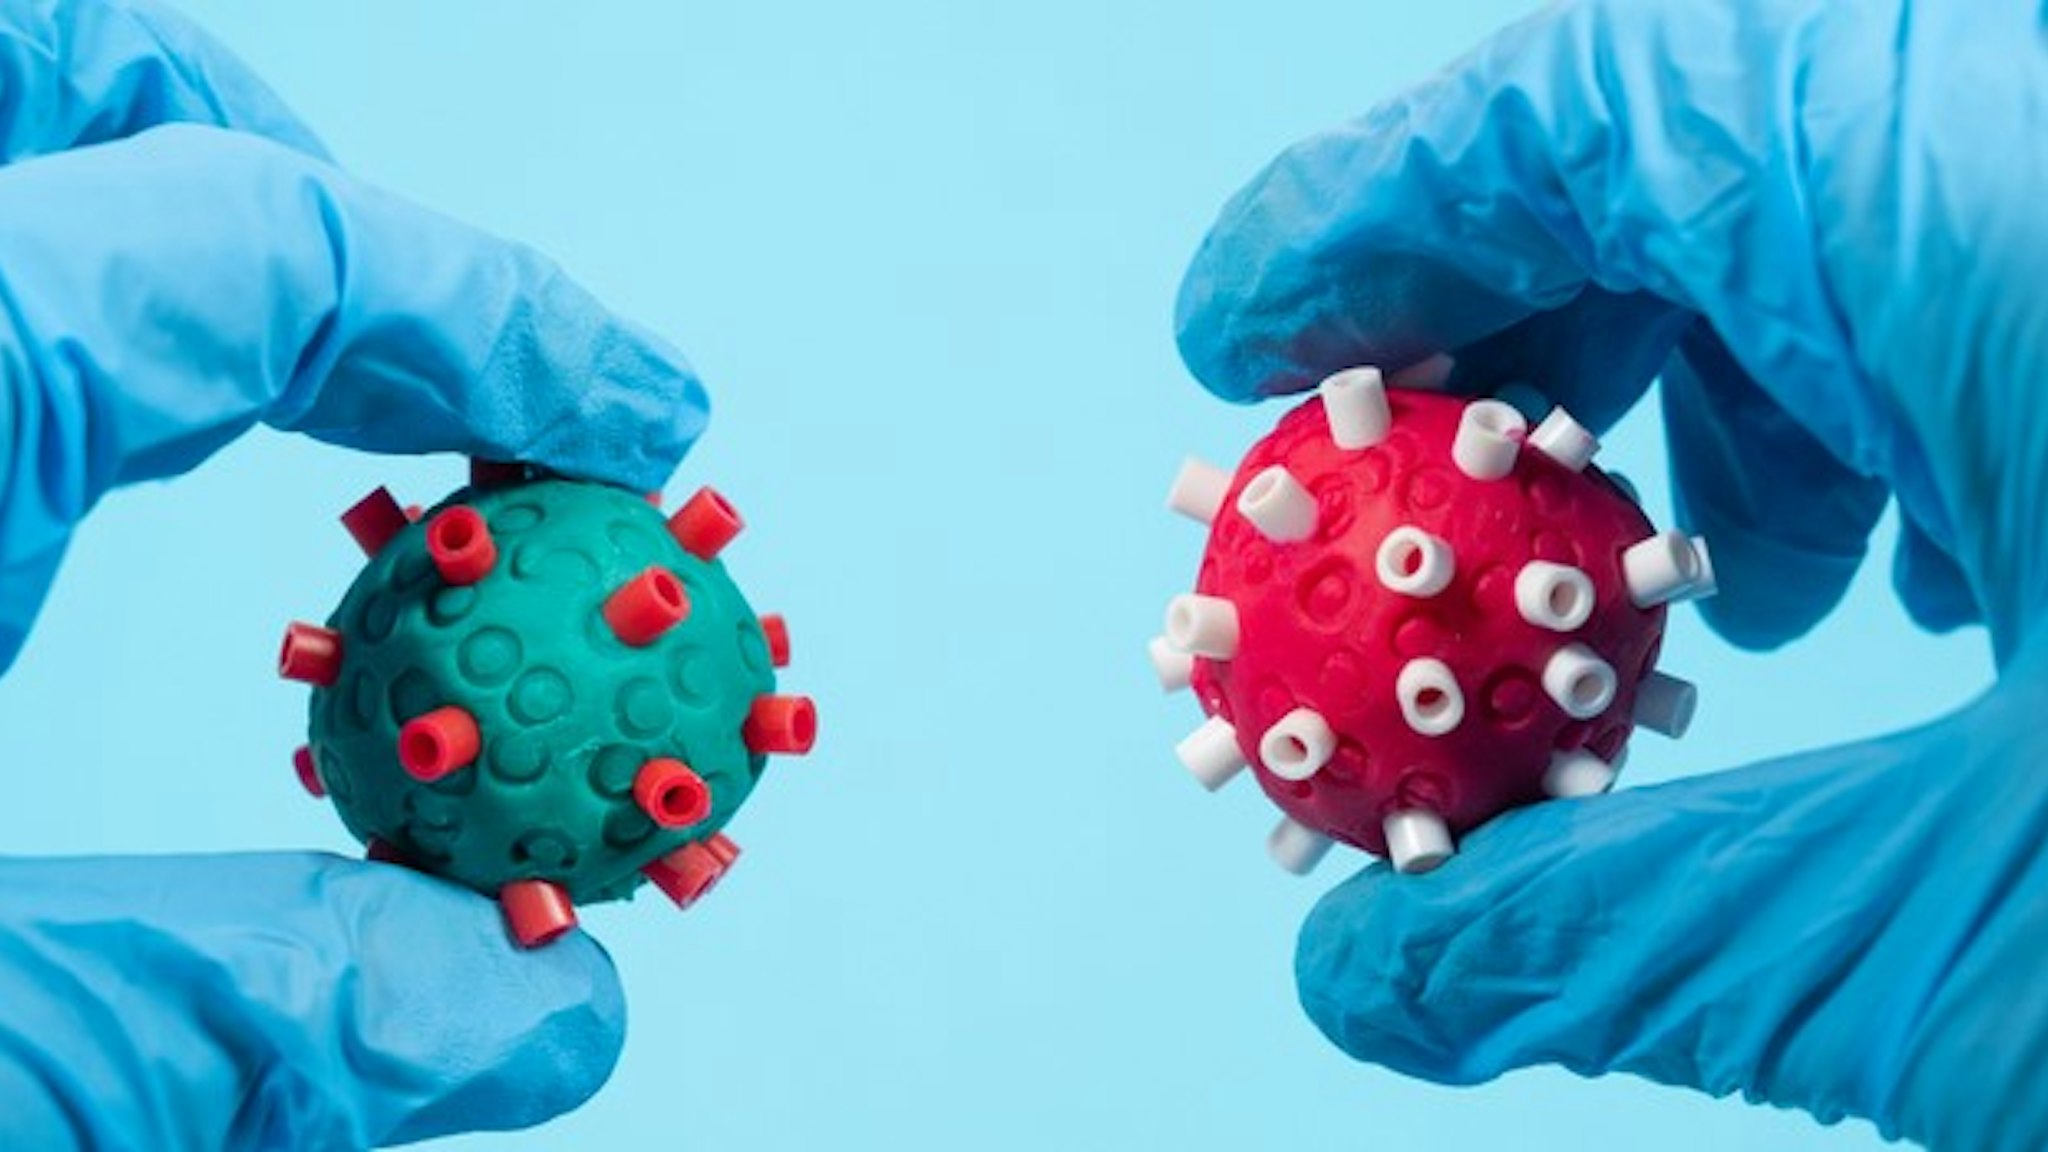 Scientists with surgical gloves holds two different Coronavirus of different color in the hand. Creative image.